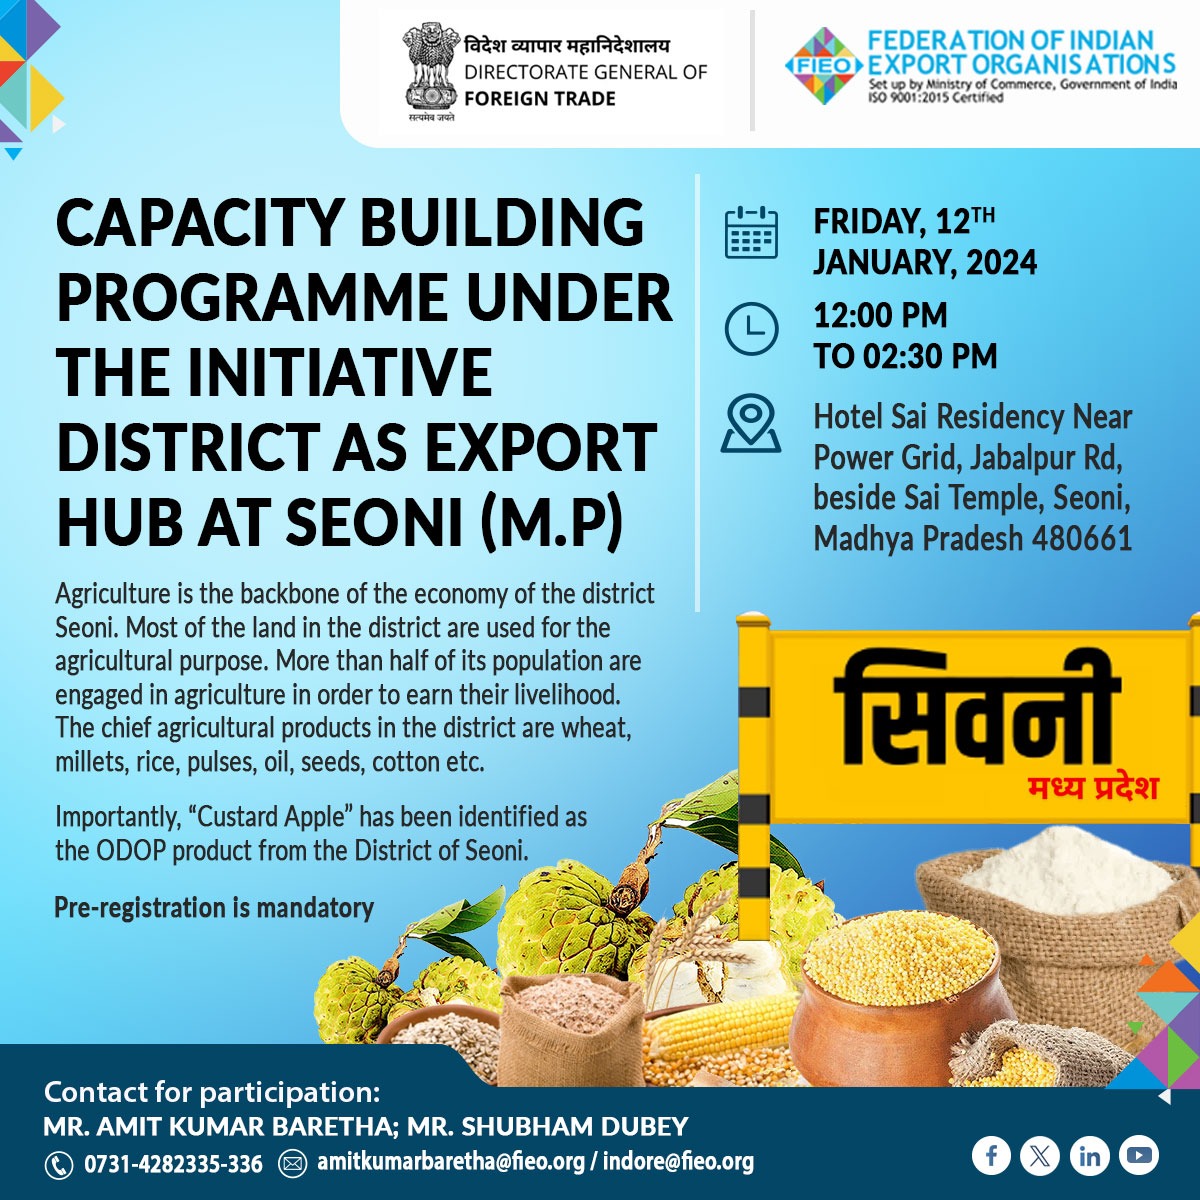 Join FIEO's transformative Capacity Building Programme at Seoni, MP on Jan 12, 2024 to unravel major insights on starting and expanding your Export Business in the flourishing district of Seoni, known for its vibrant agricultural landscape. Register at fieo.org/Seoni